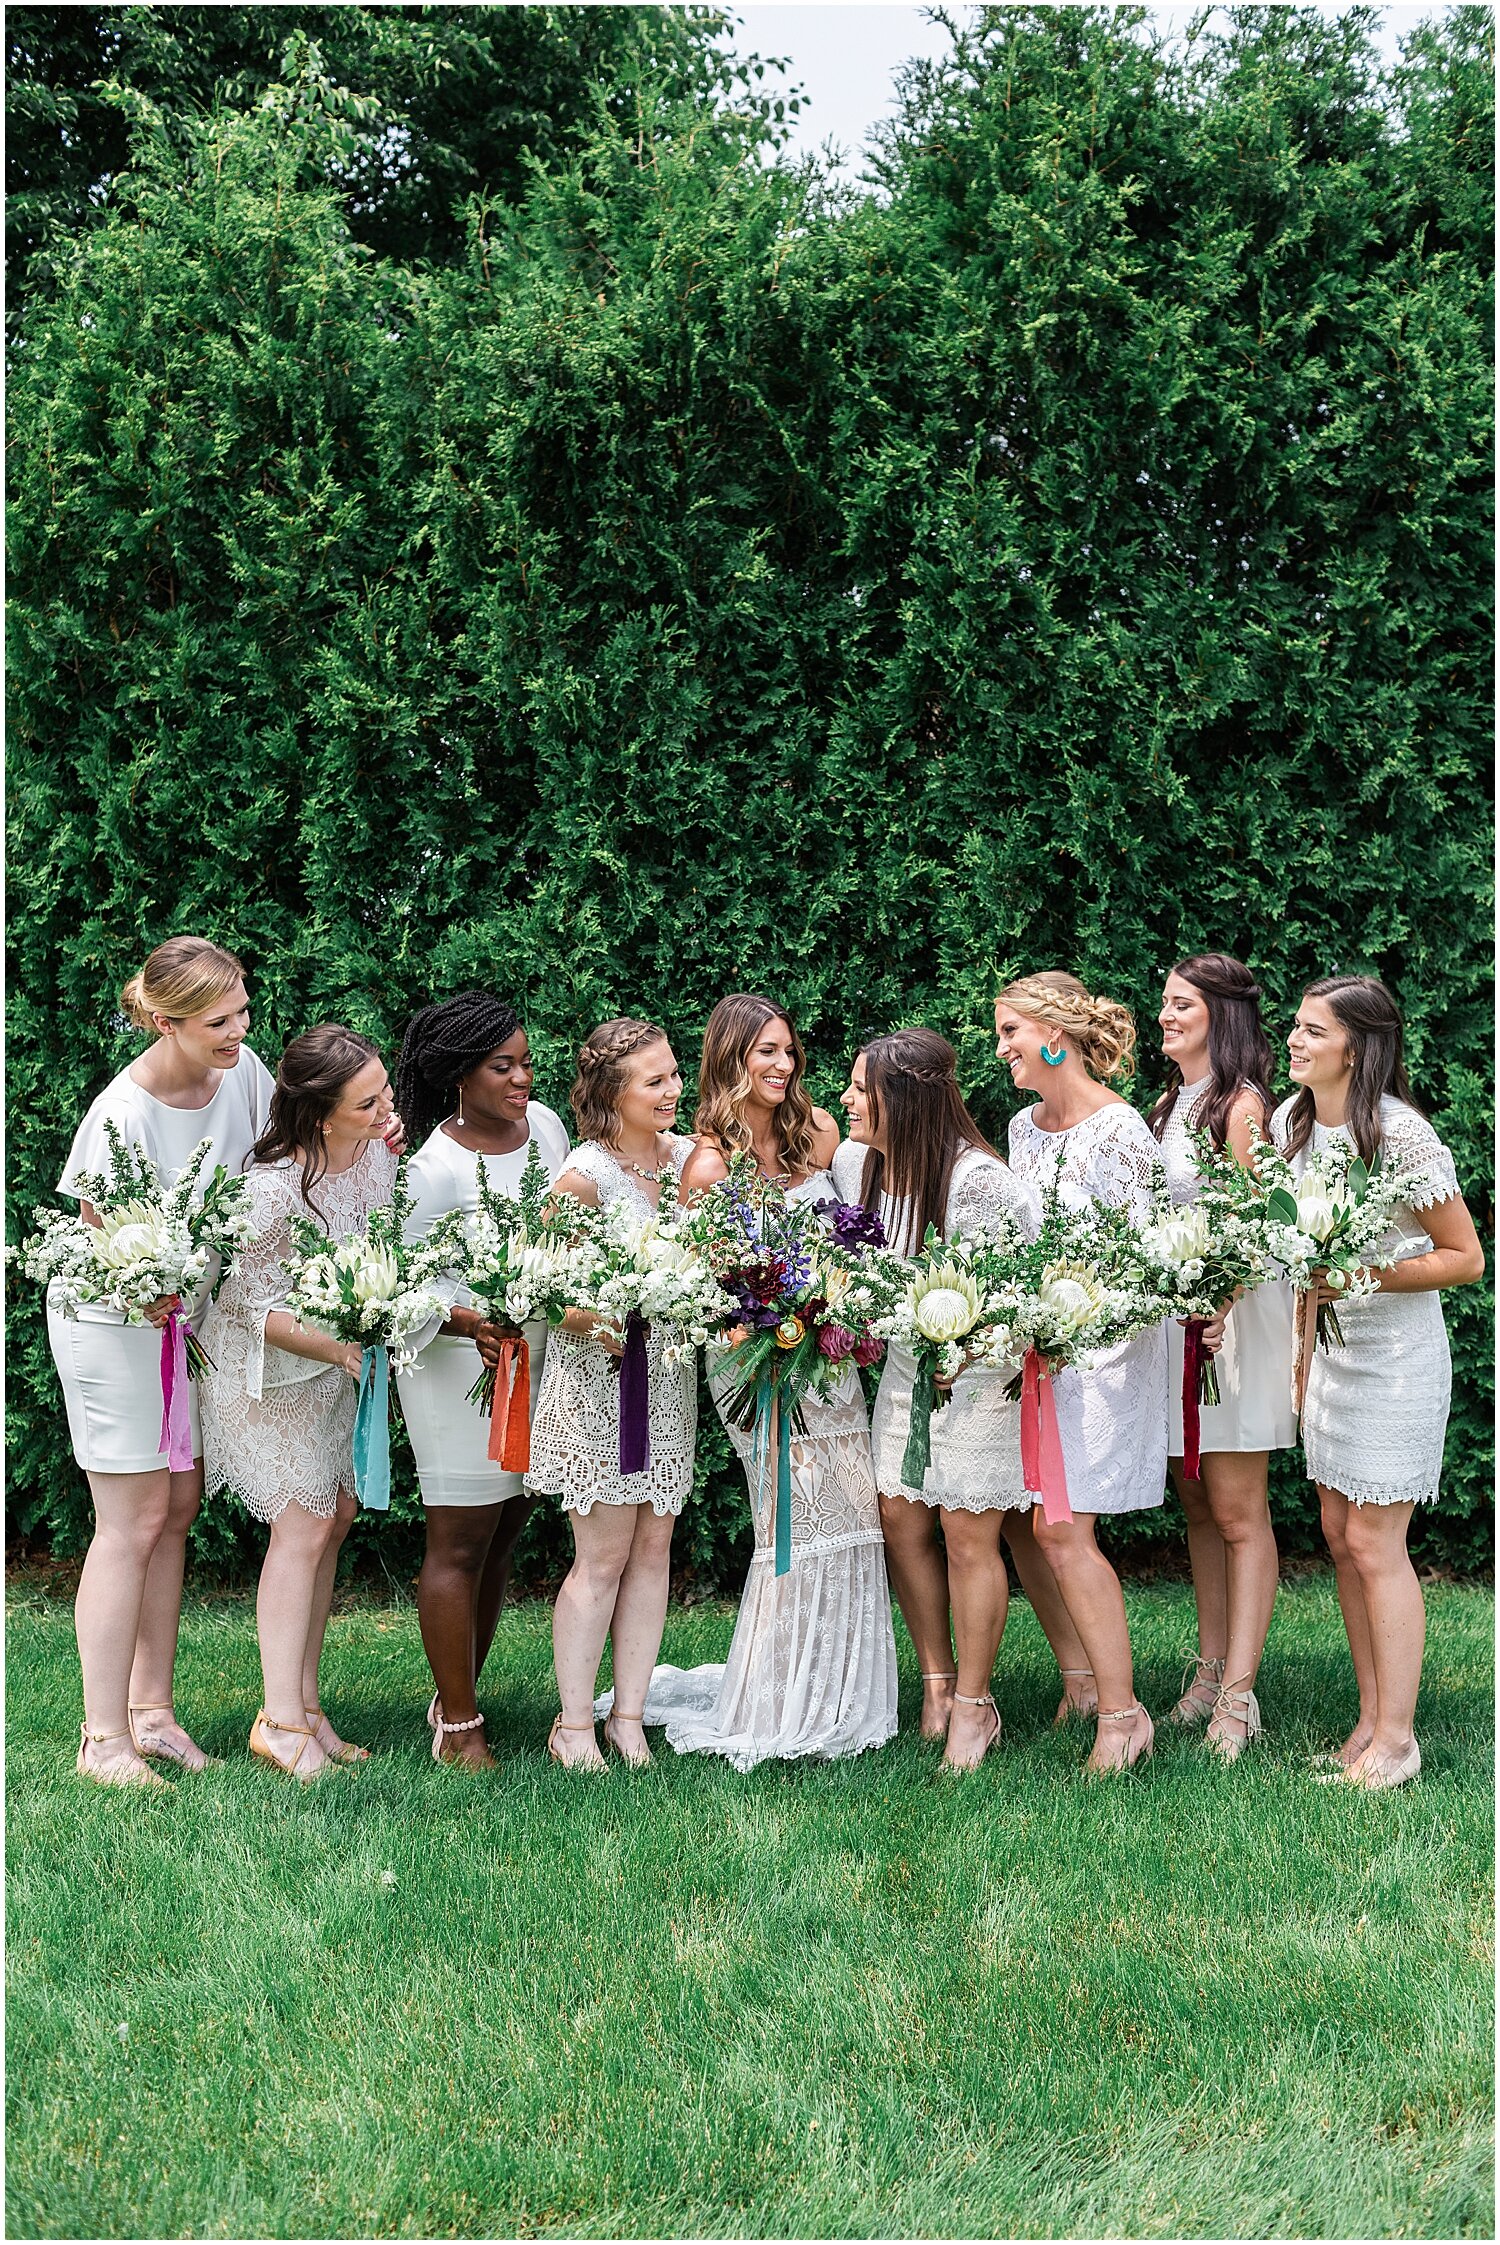 Bohemian Dream Tented Wedding by wedding planners A Charming Fete and cleveland wedding photographer Lindsey Ramdin